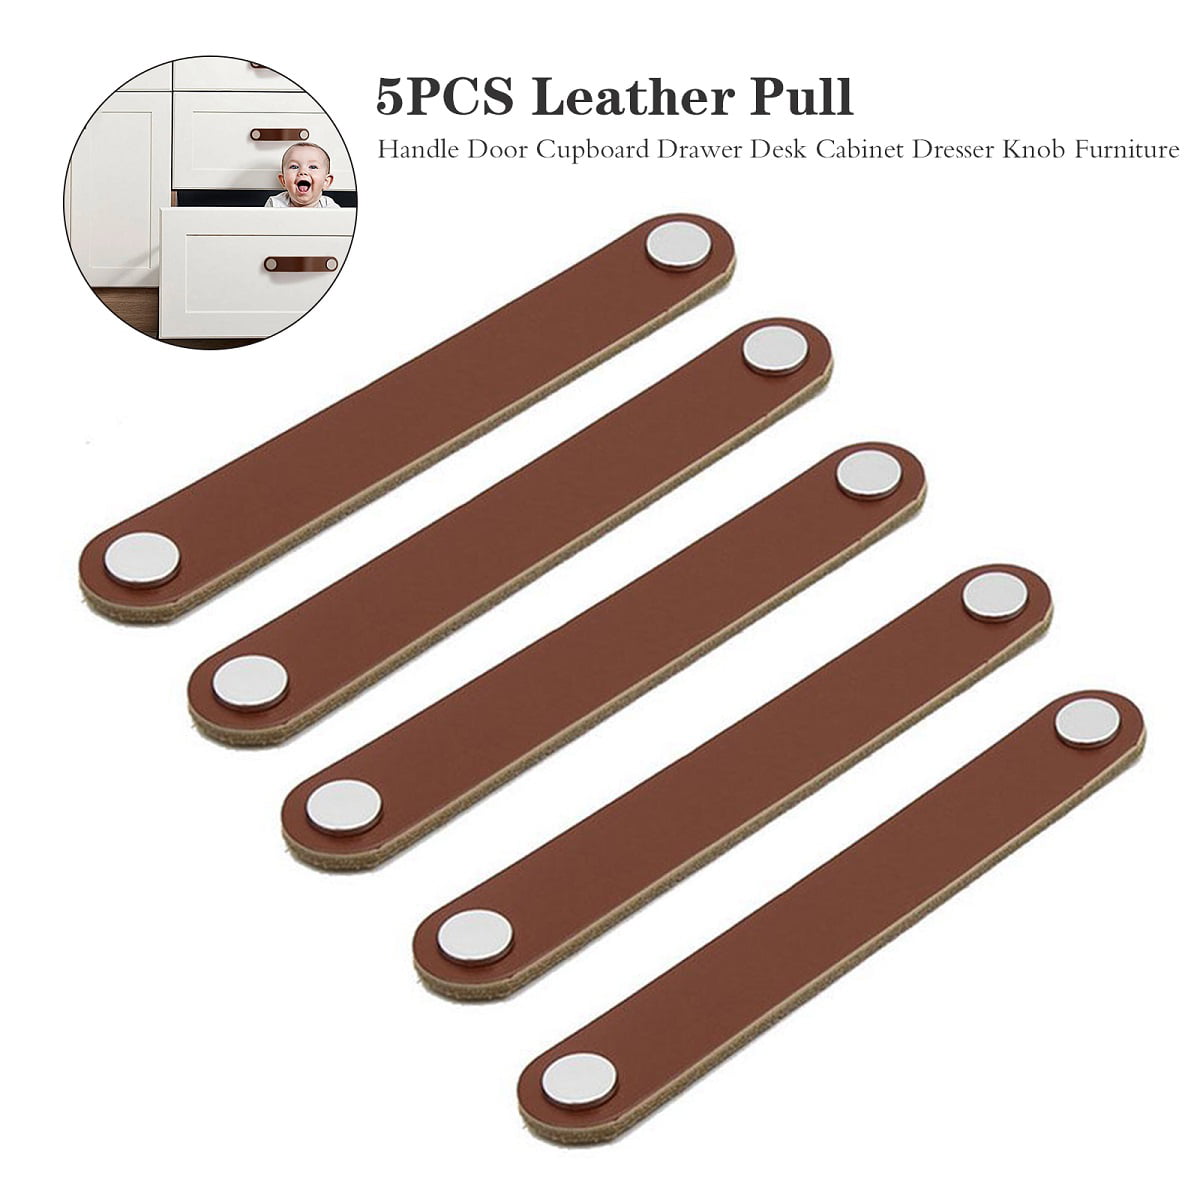 12 Packs Handmade Genuine Leather Pulls Handmade Soft Leather Cabinet Knobs,Wardrobe Handles for Upgrading The Look of Furniture,Replacement of Metal Cabinet Hardware